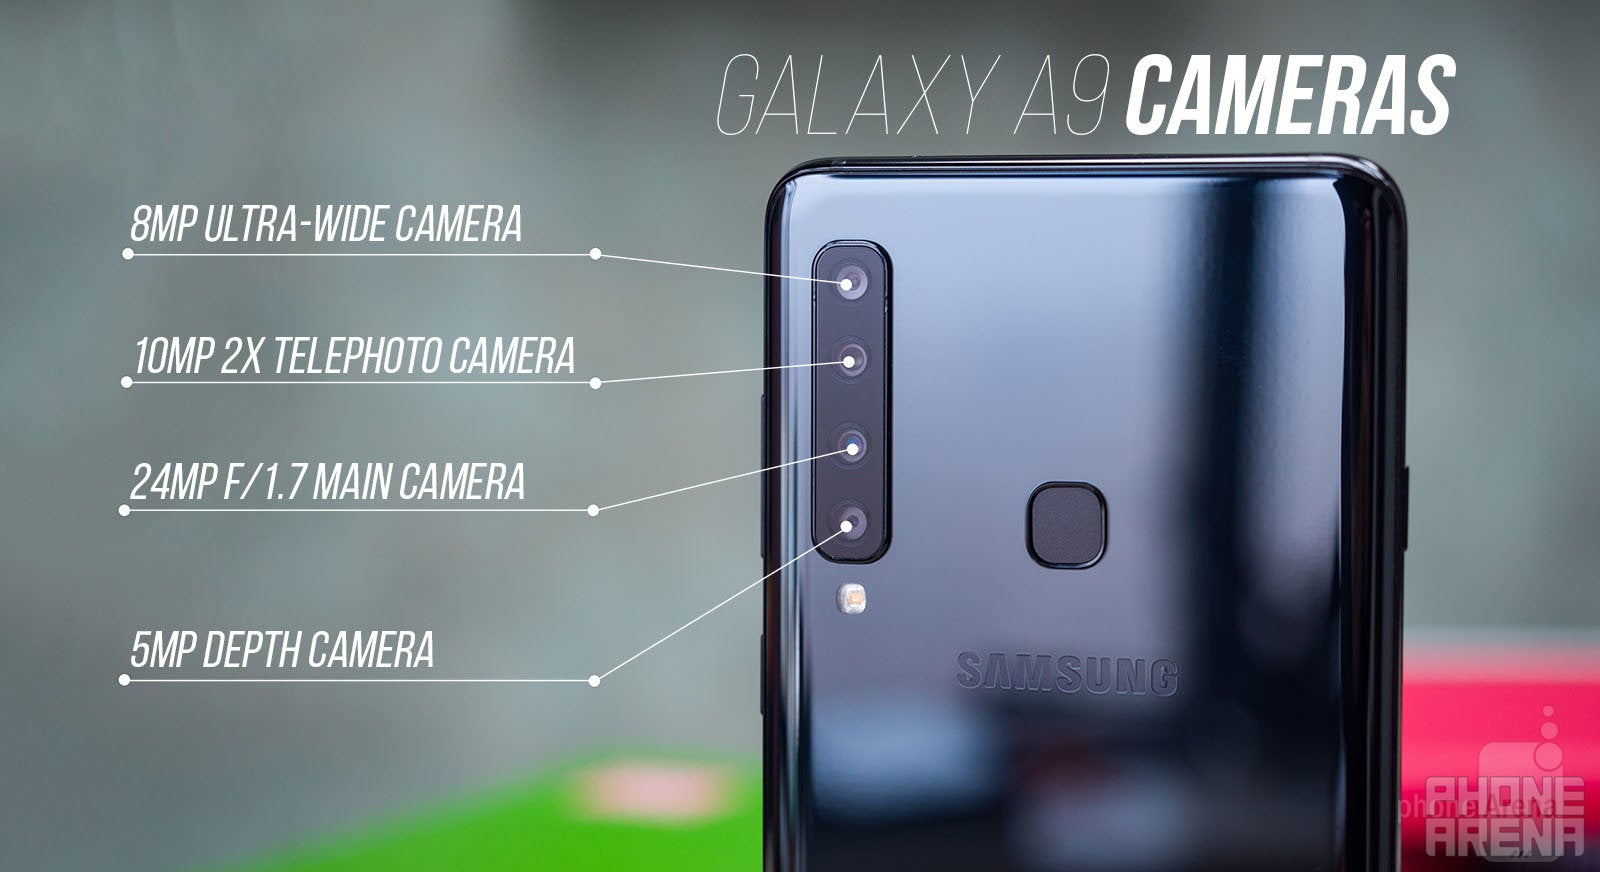 Samsung Galaxy A9 (2018) Review: Quad Cameras Don't Live Up To The Hype -  MySmartPrice